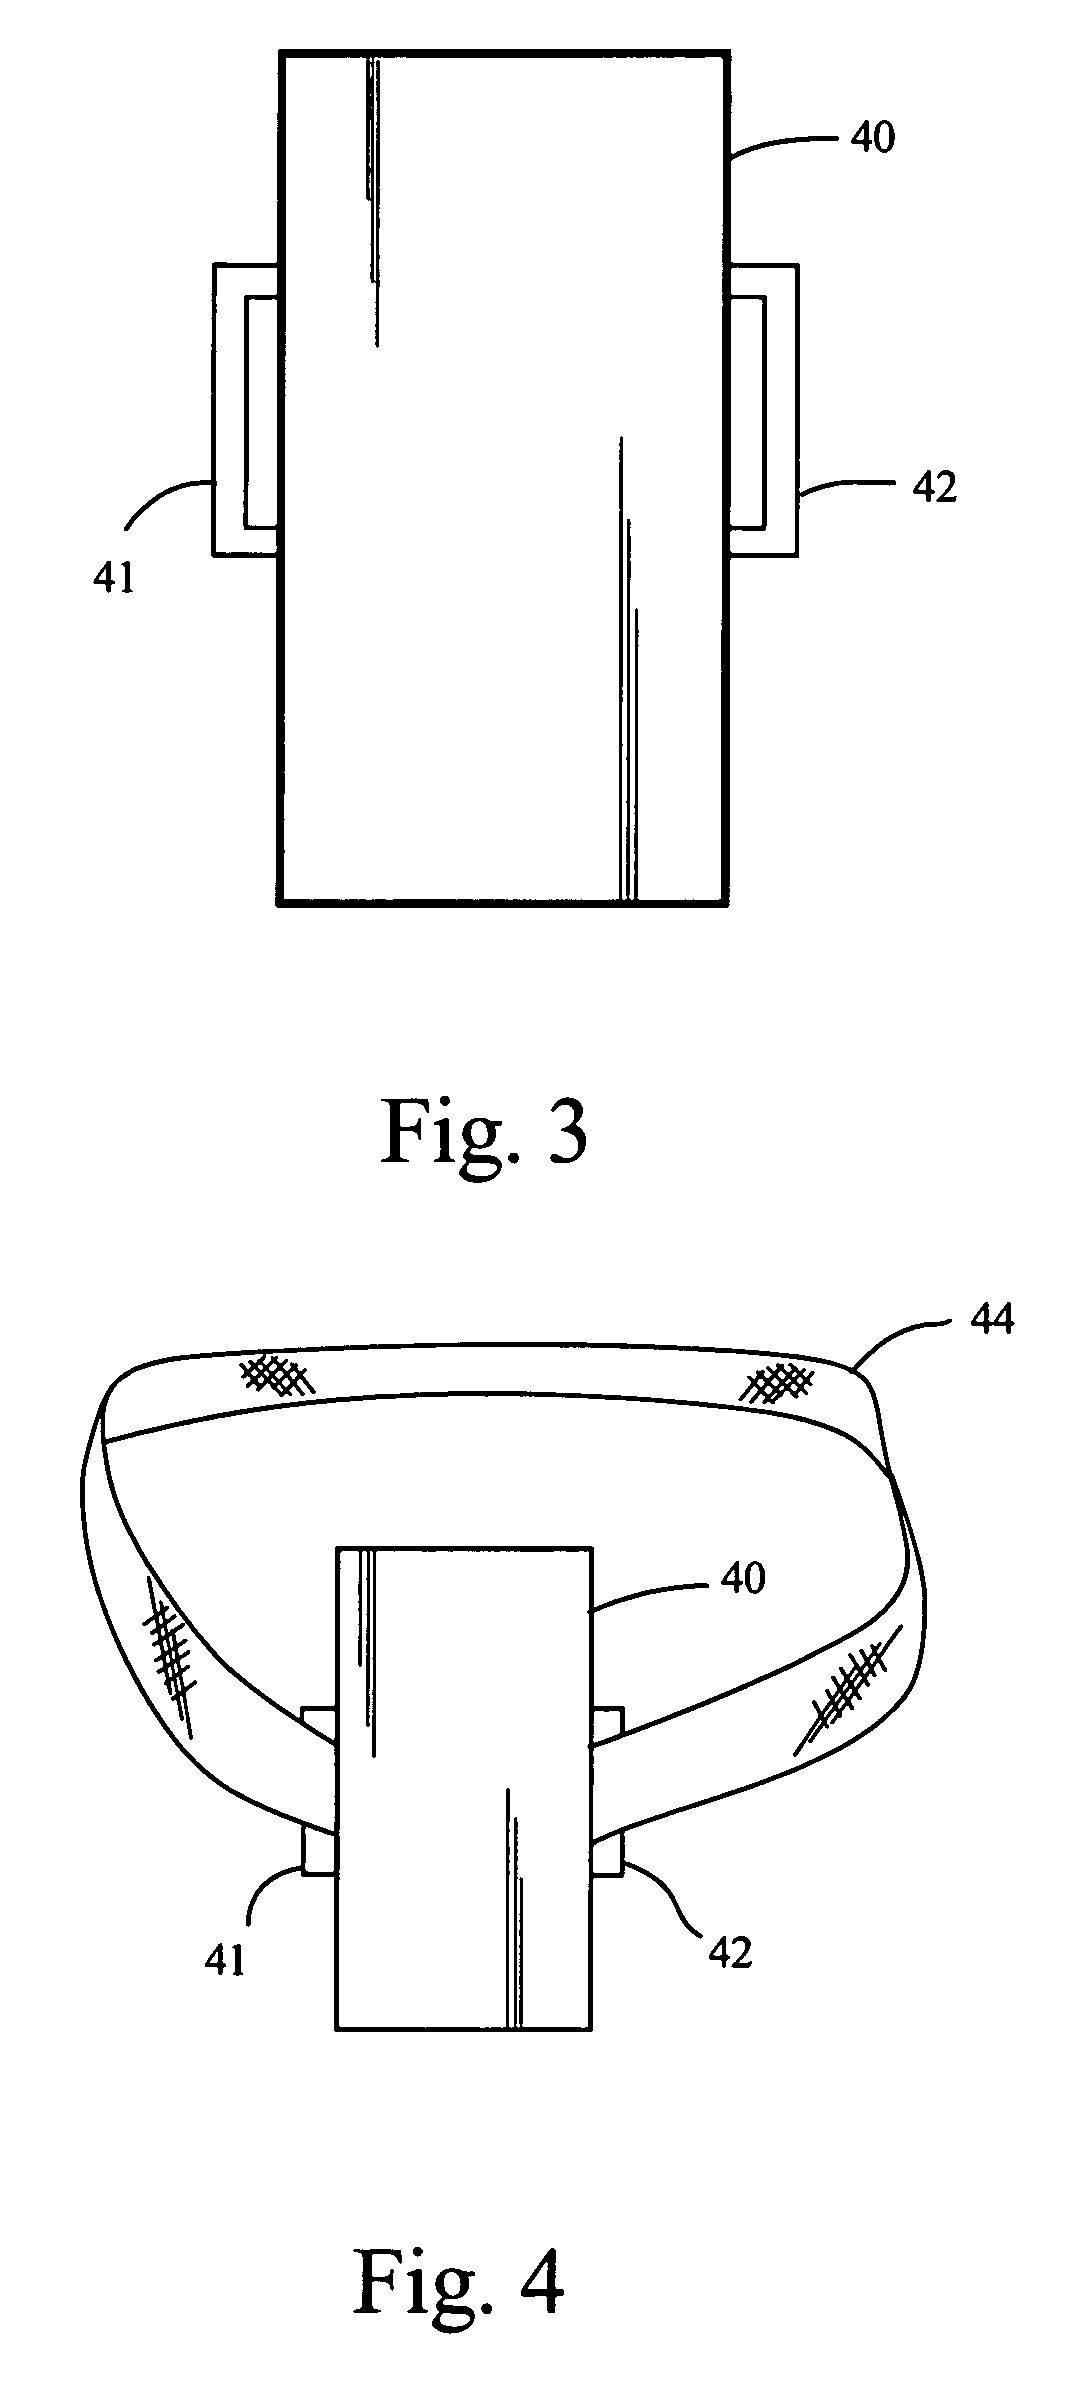 Partially implantable system for the electrical treatment of abnormal tissue growth